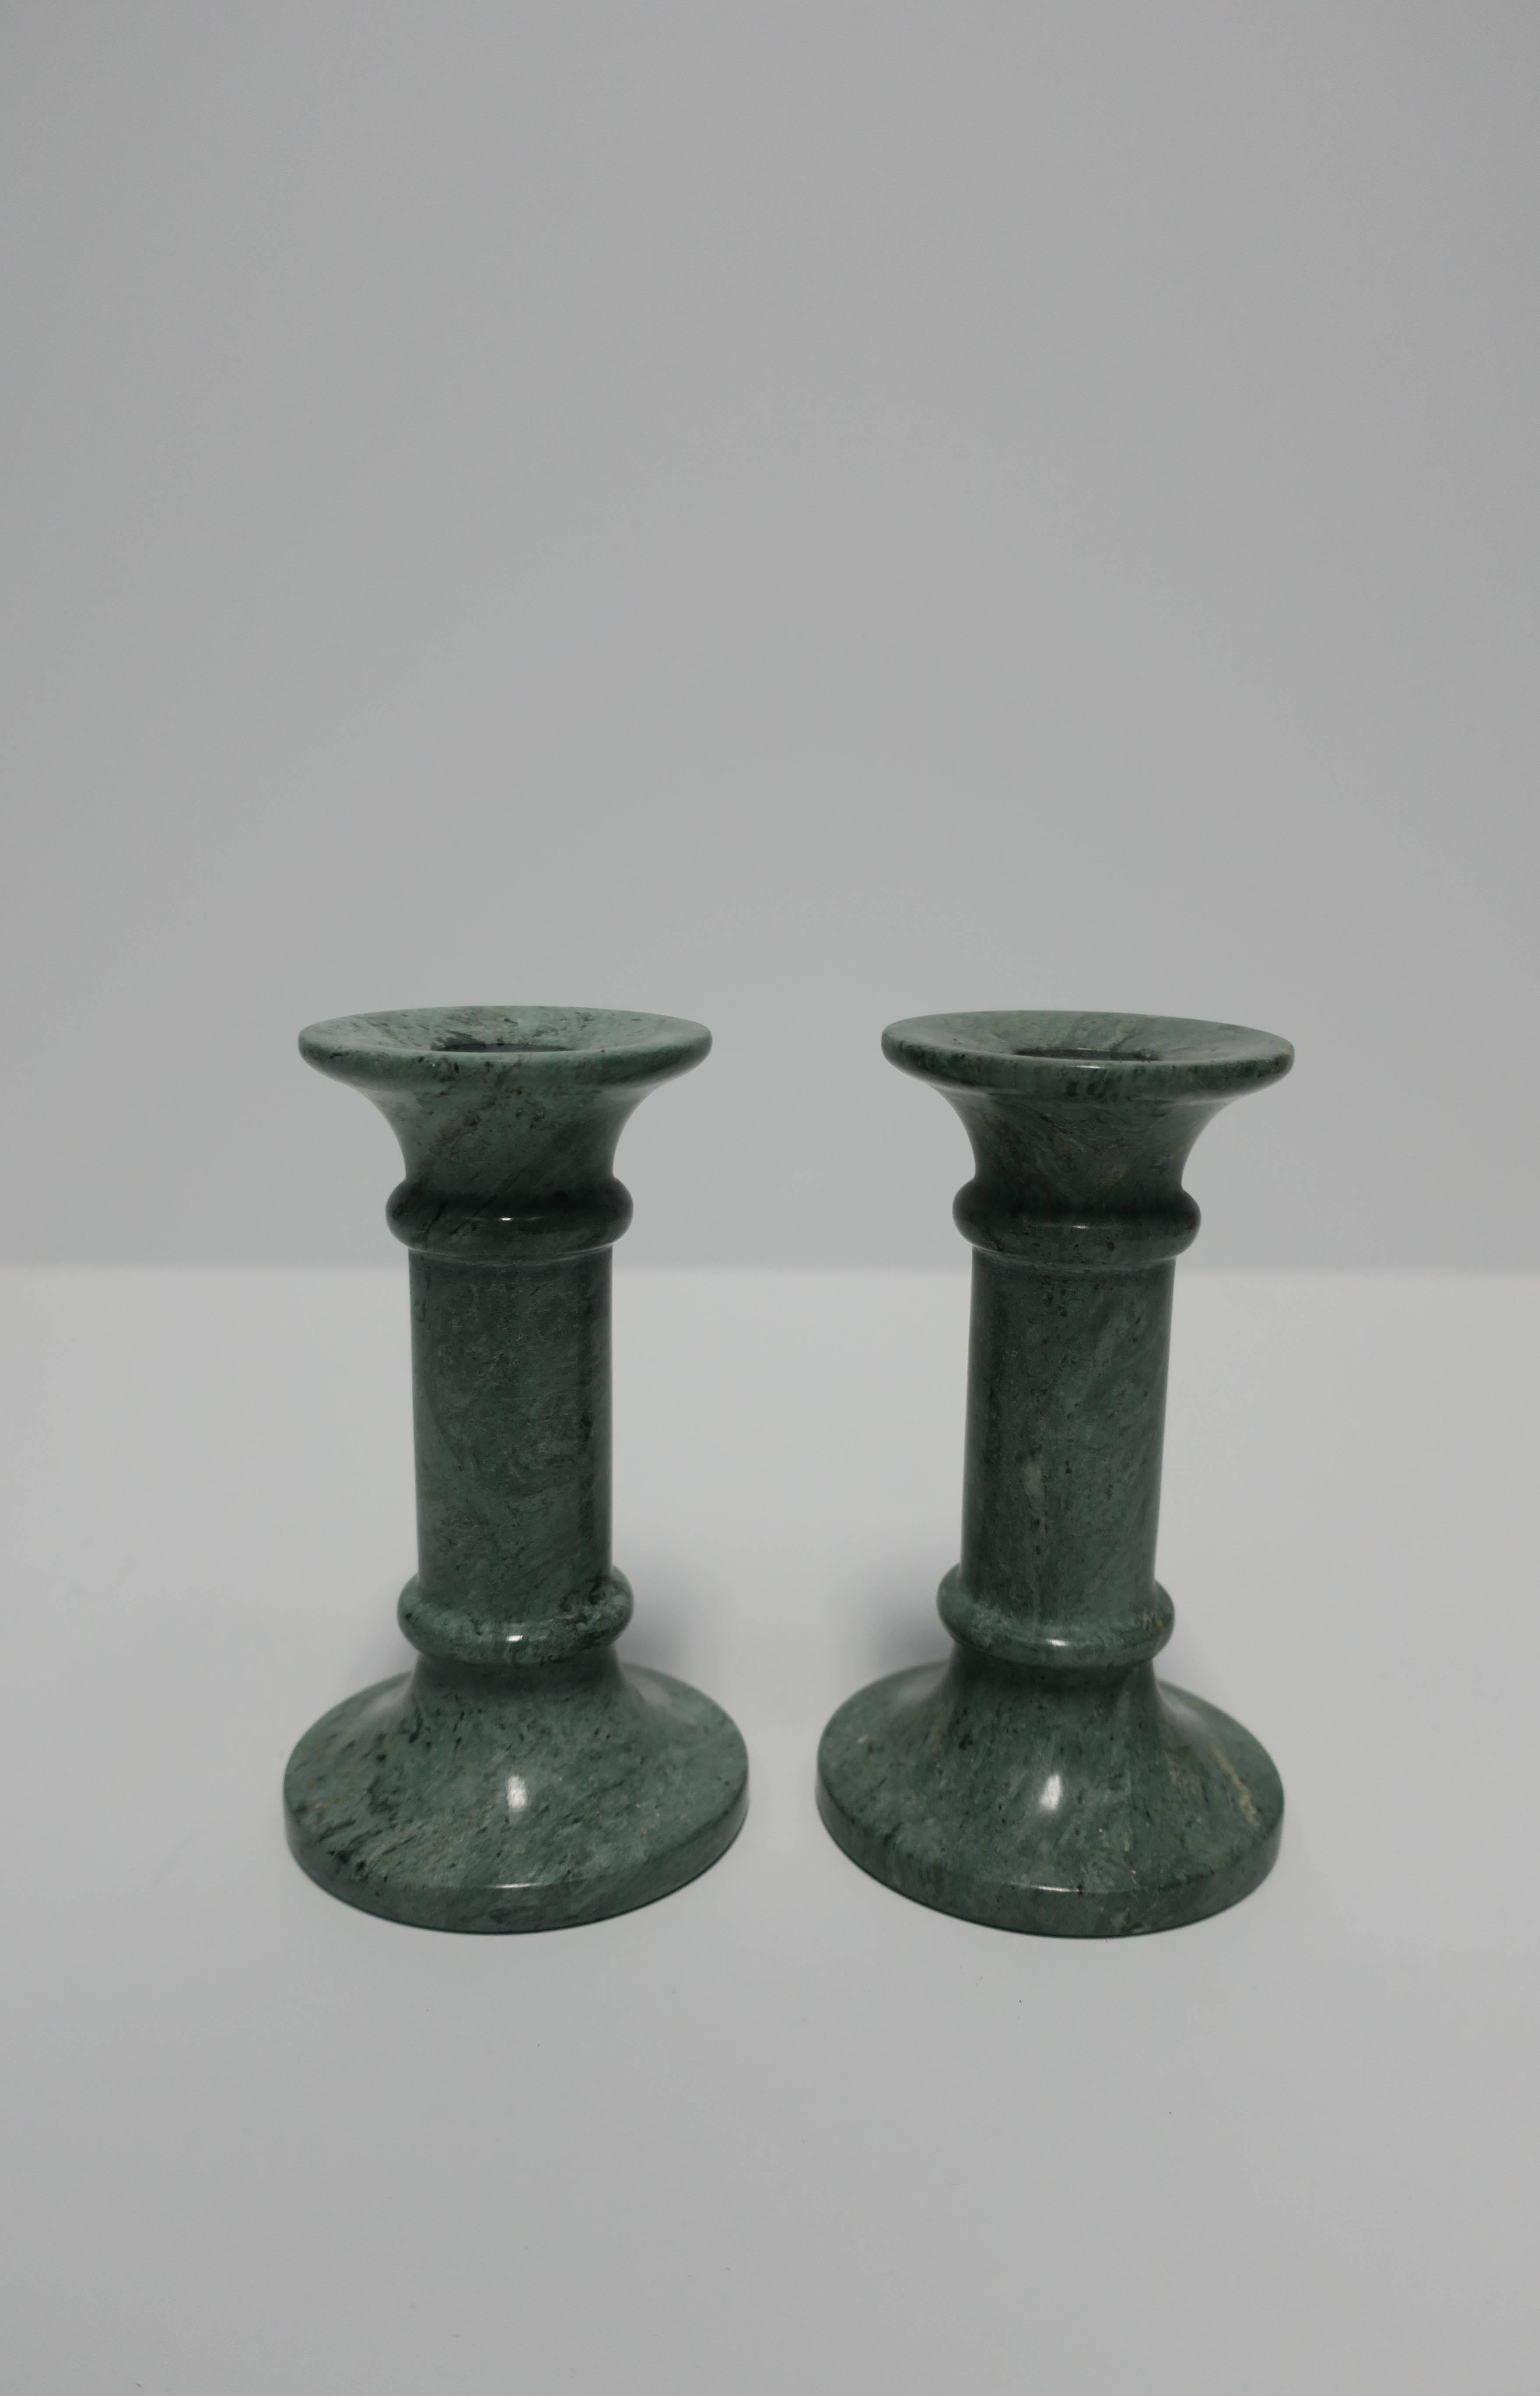 A pair of medium to dark green marble candlestick holders. A single piece of marble, carved and polished smooth, circa 1970s, late-20th century. Measuring 5.25